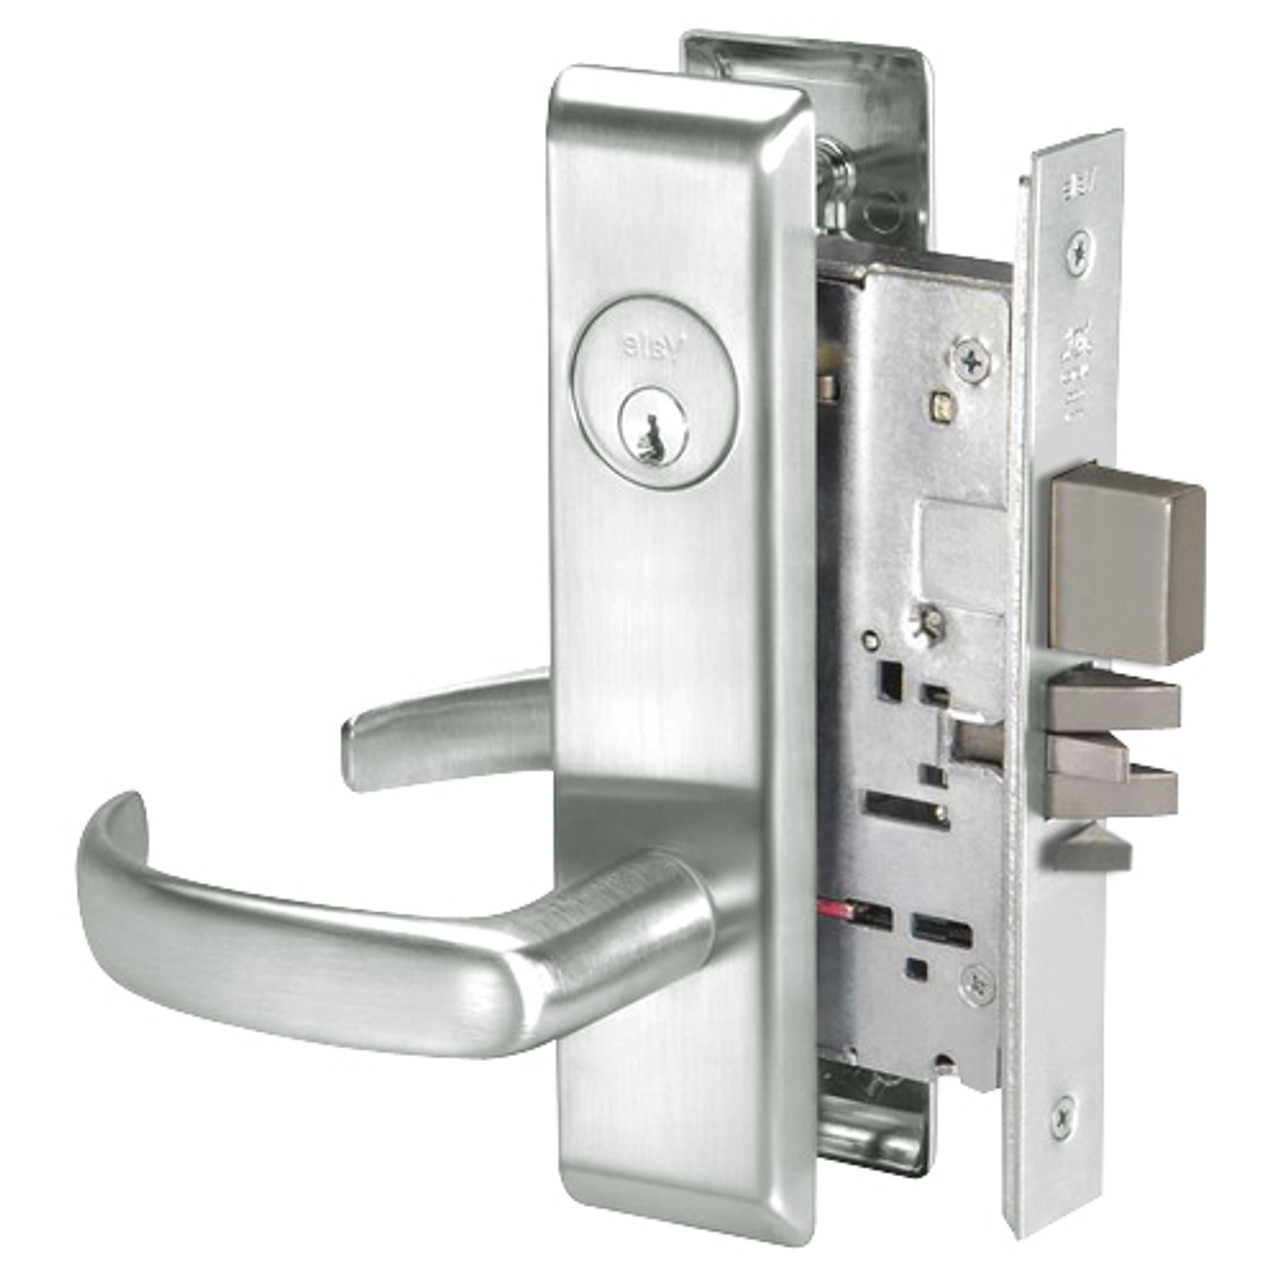 PBCN8812-2FL-618 Yale 8800FL Series Double Cylinder Mortise Classroom Security Deadbolt Locks with Pacific Beach Lever in Bright Nickel